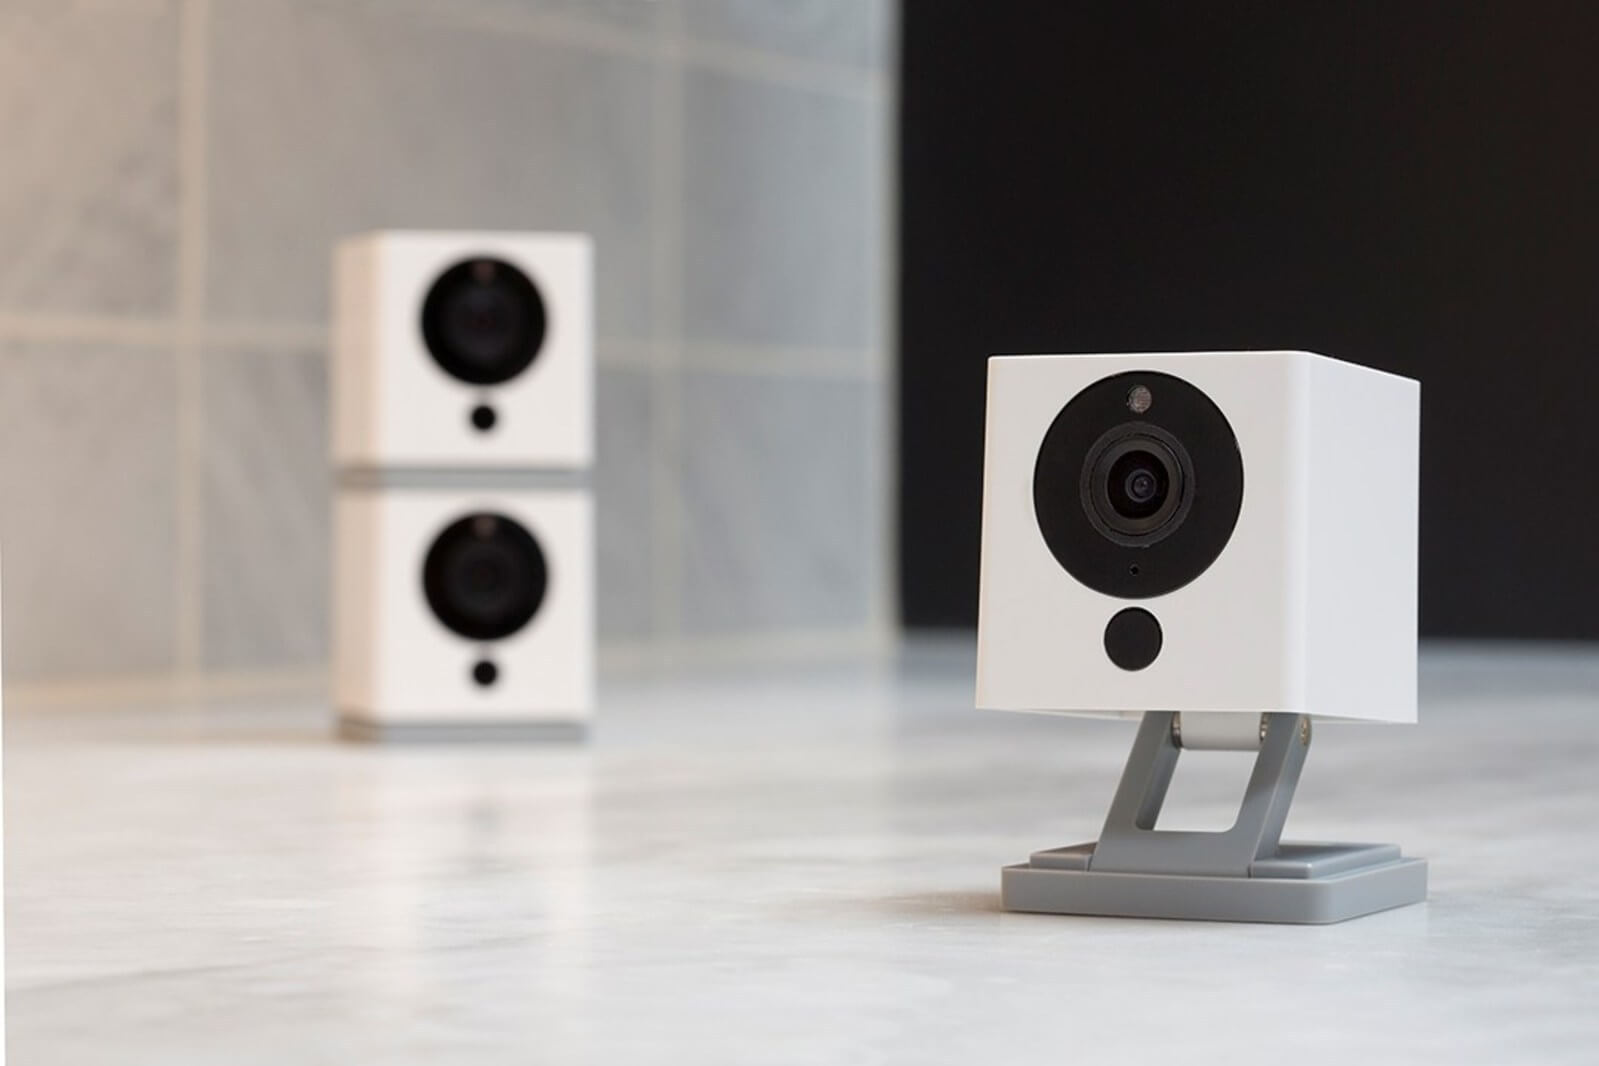 Wyze knew about camera vulnerabilities that let strangers watch your feeds and recordings